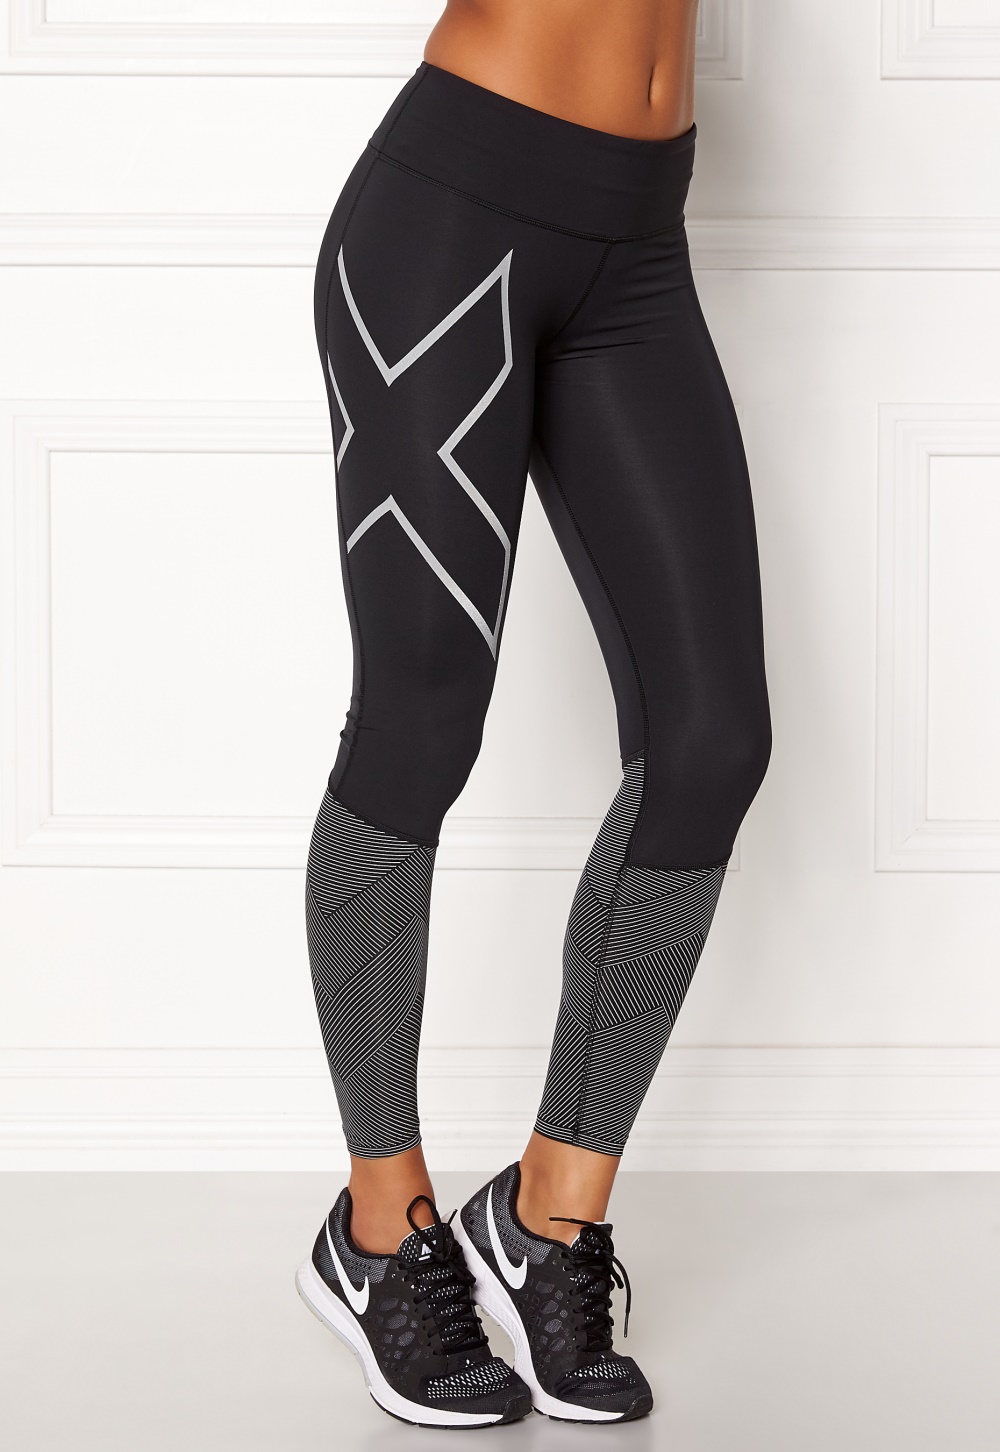 Mid-Rise Reflect Tights Black/silver -